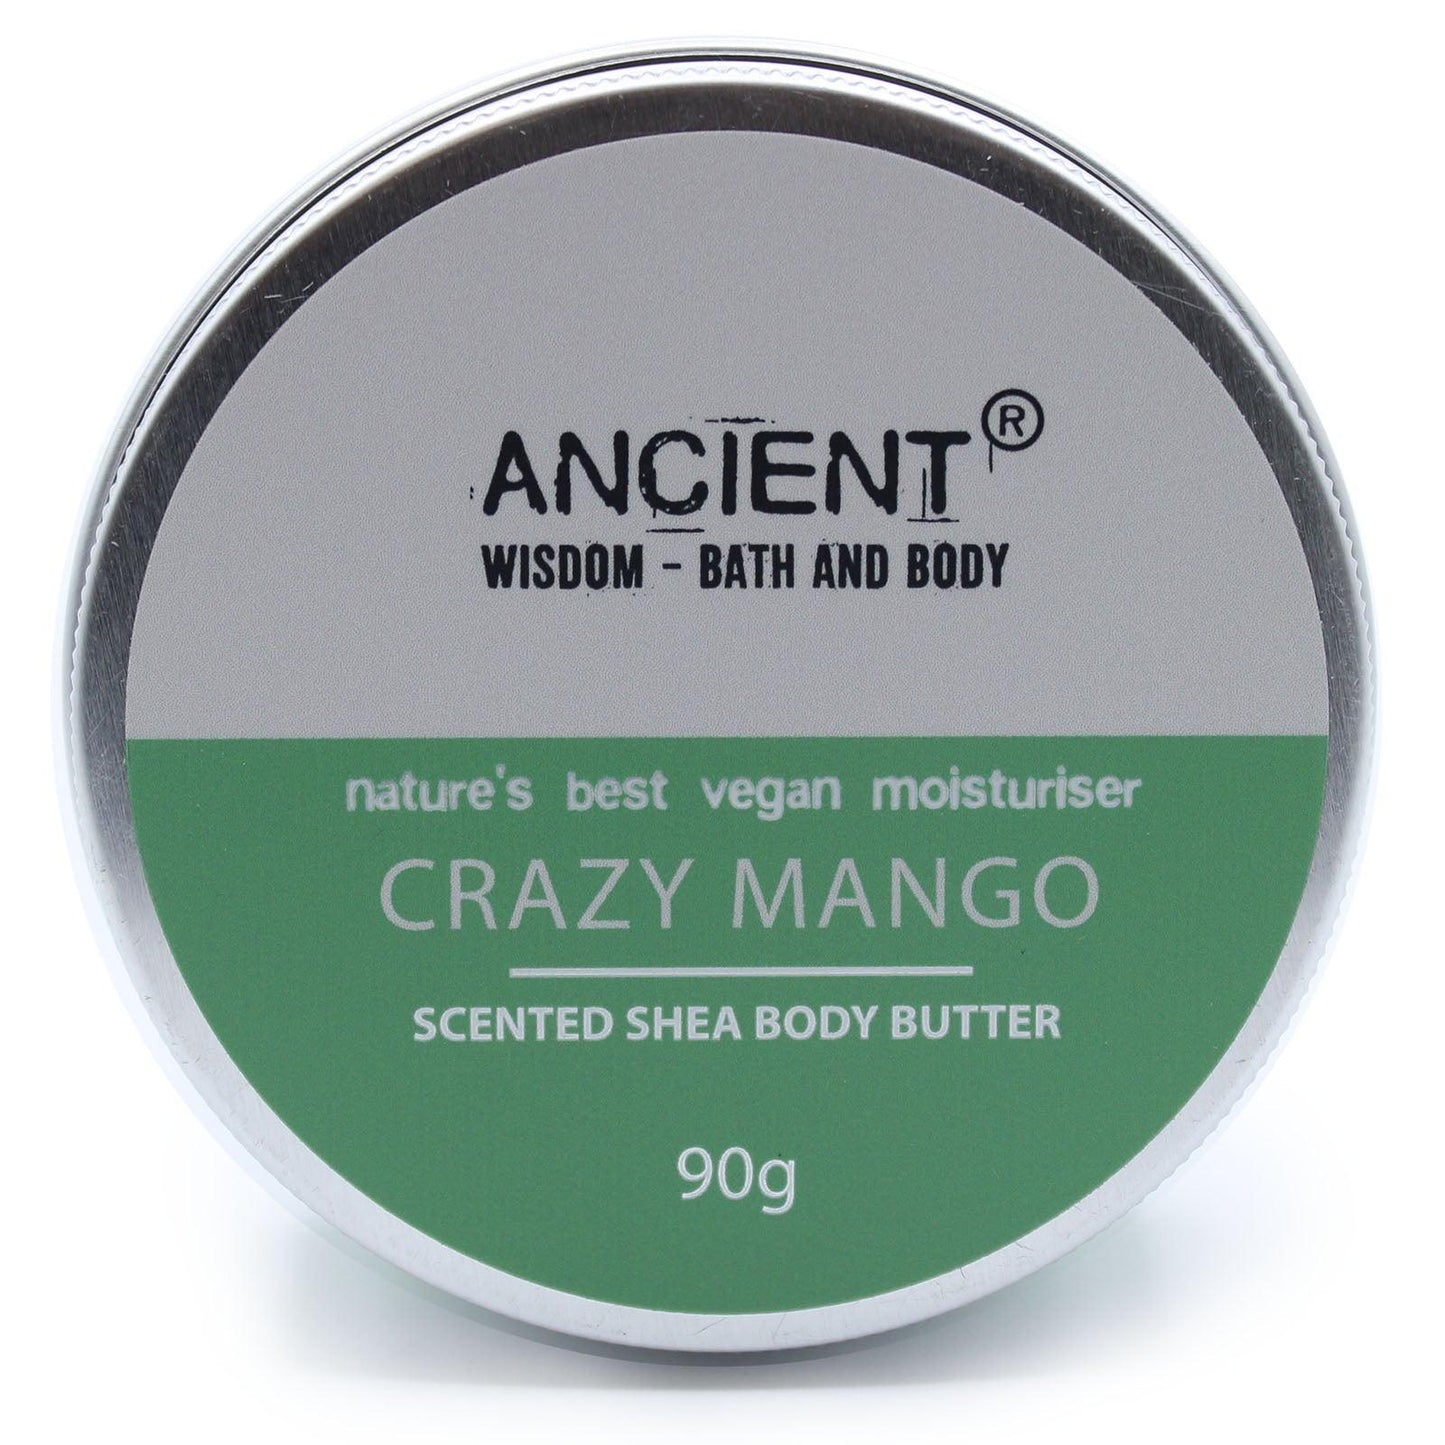 Scented Shea Body Butter 90g - Crazy Mango - DuvetDay.co.uk